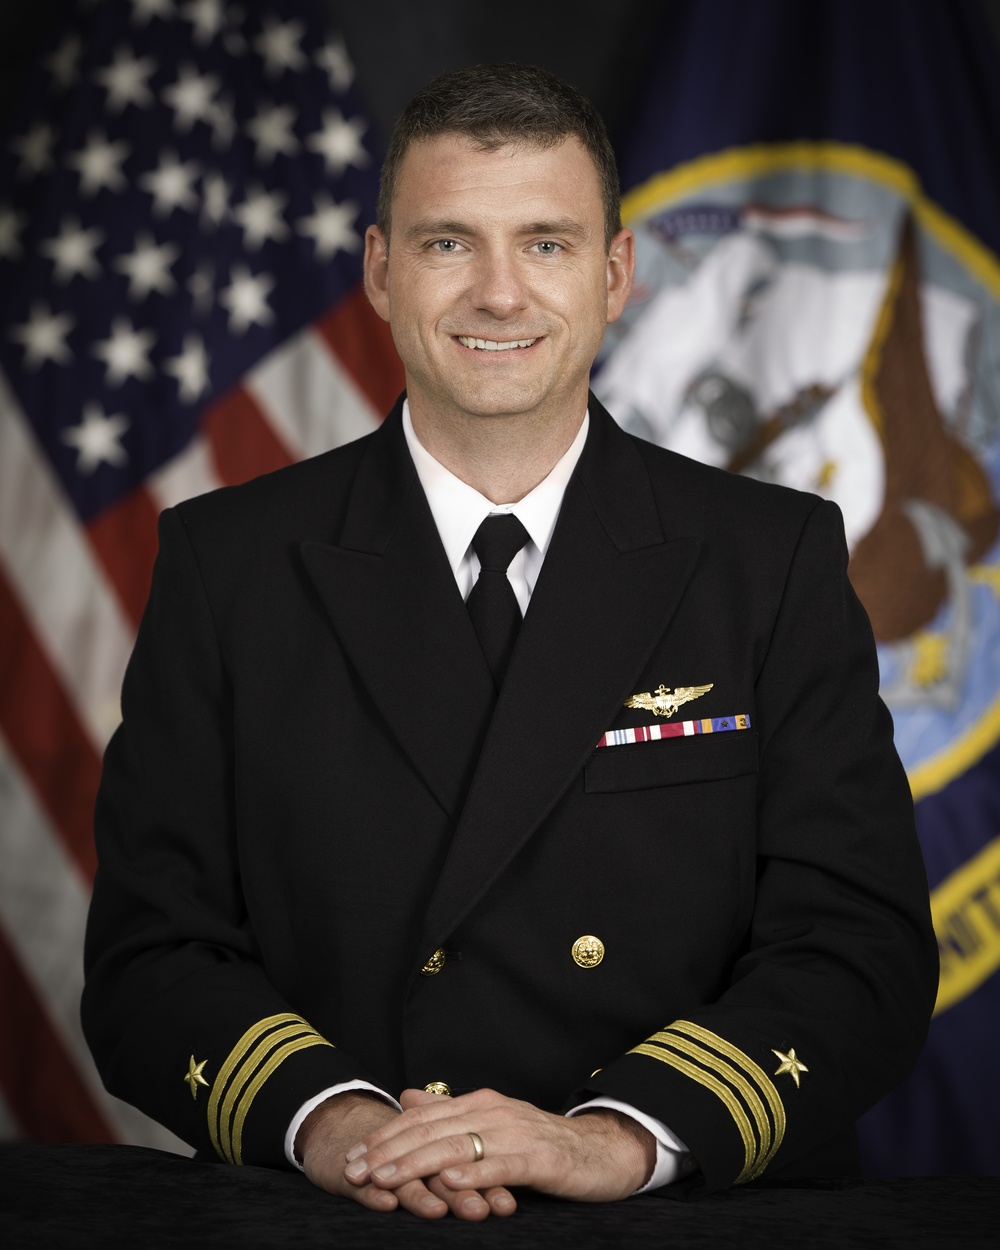 Official portrait, Executive Officer, Naval Reserve Officer Training Corps Unit The George Washington University, Cmdr. Ross H. Piper, US Navy